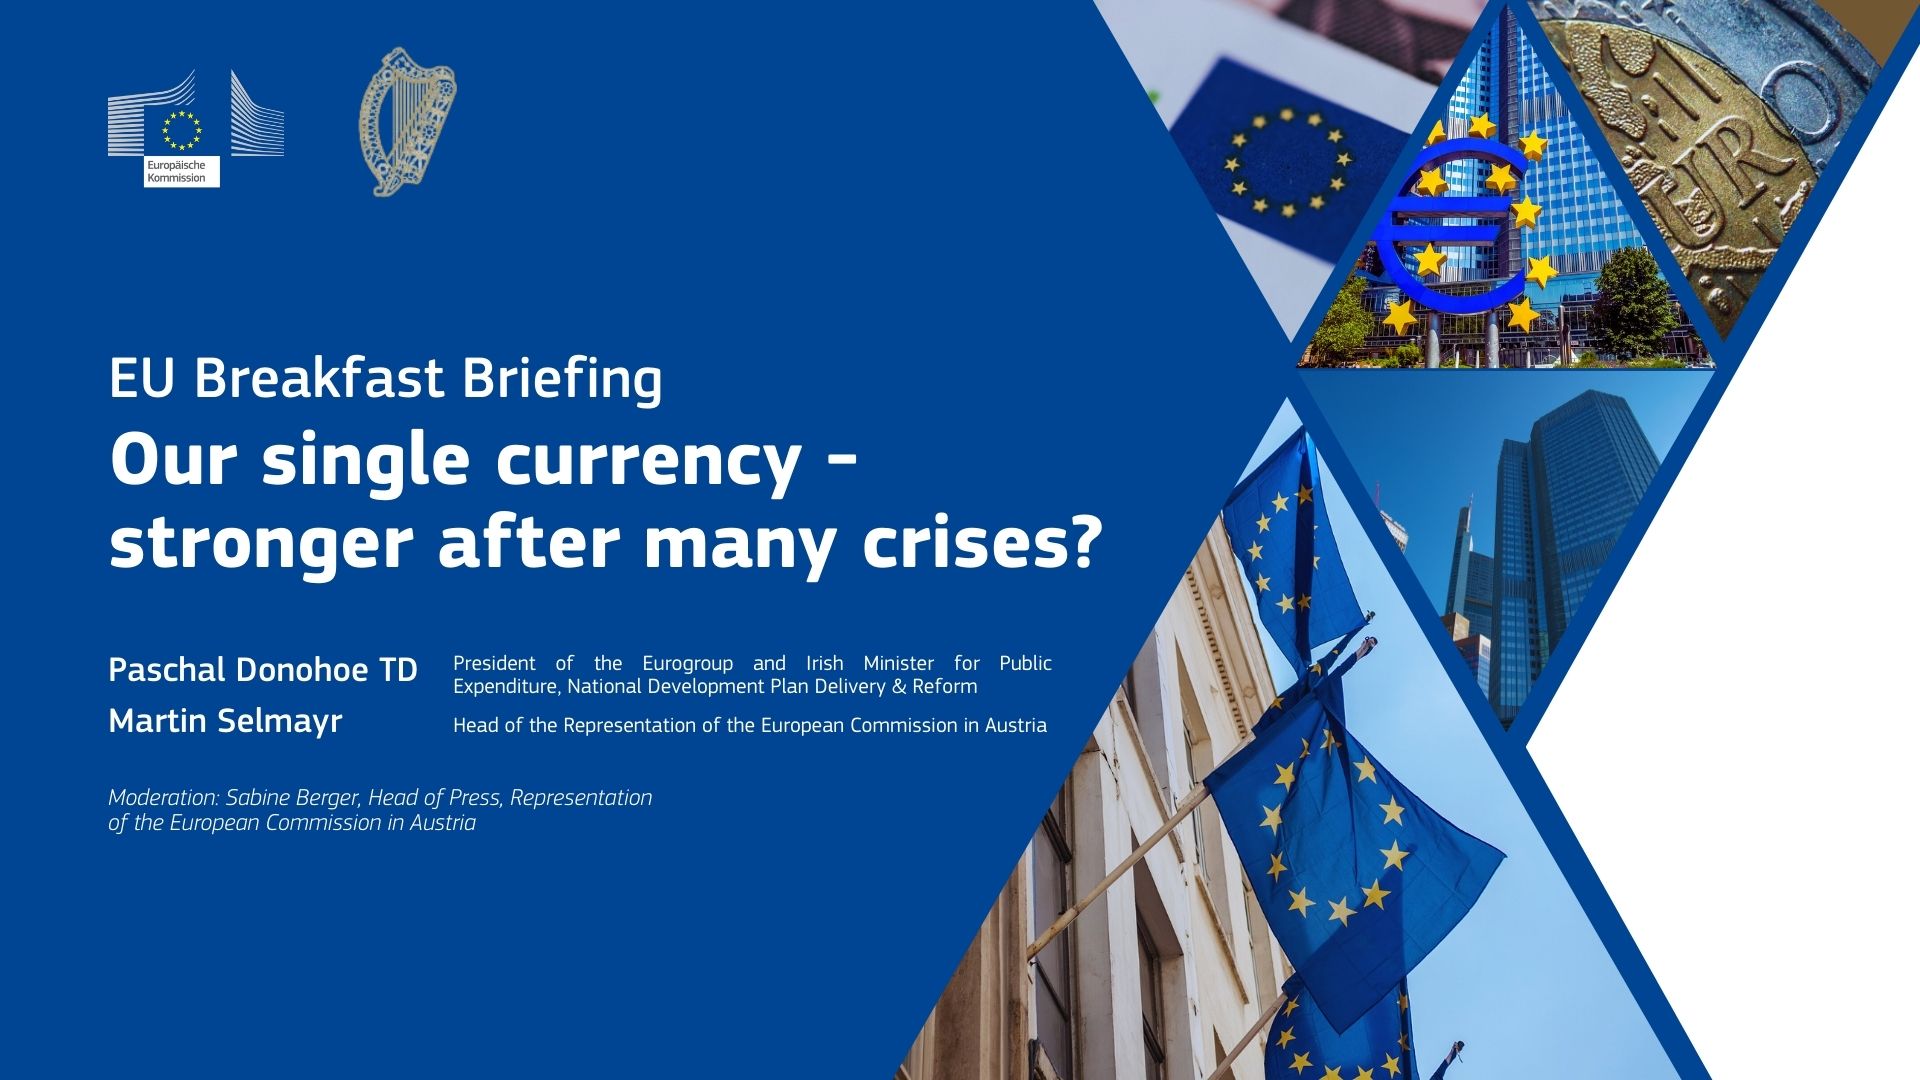 EU Breakfast Briefing Our single currency - stronger after many crises?